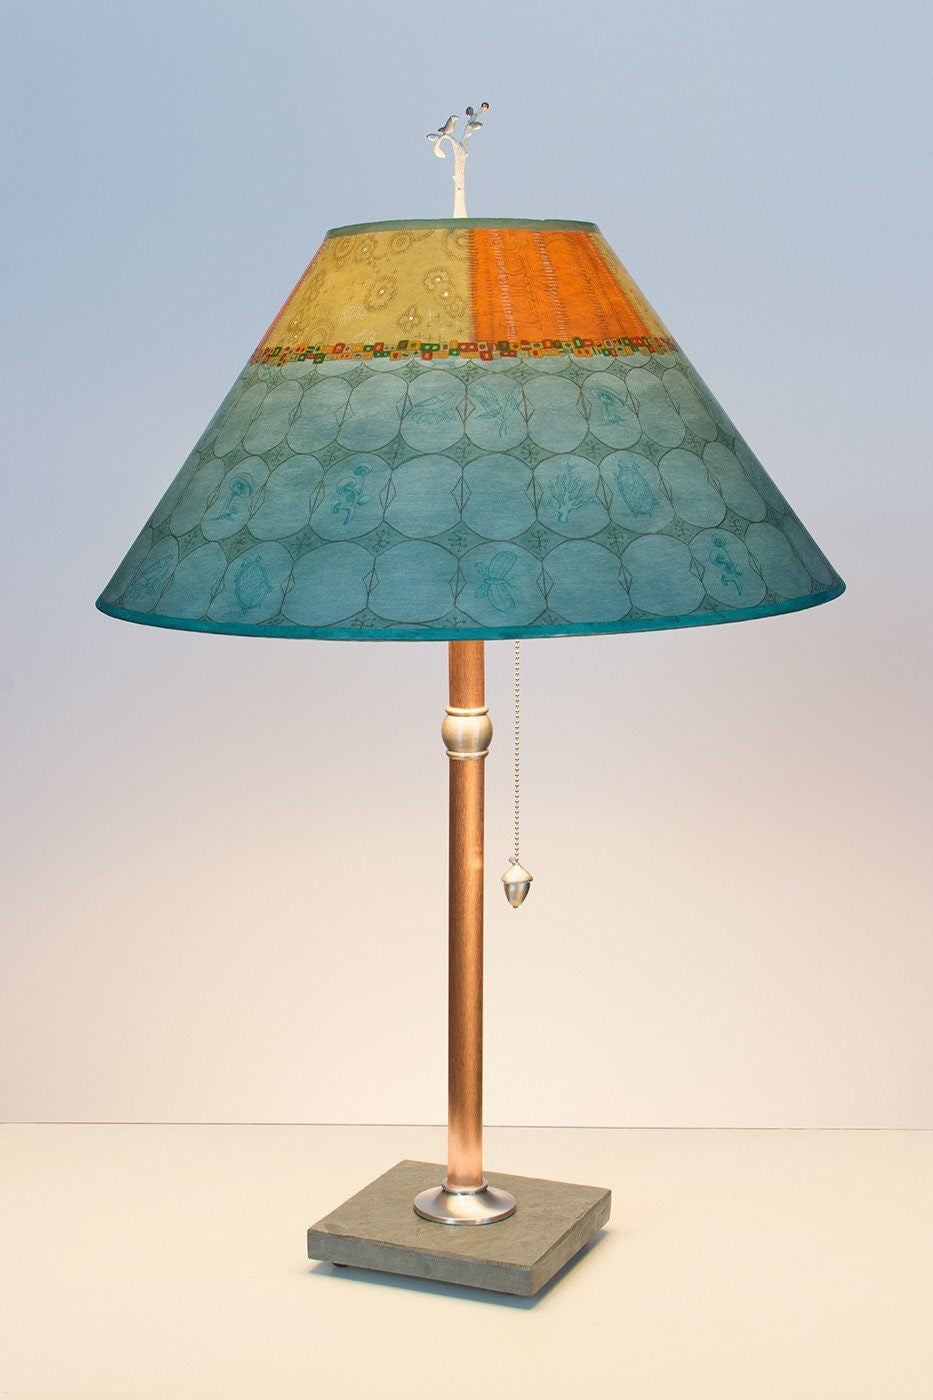 Janna Ugone & Co Table Lamps Copper Table Lamp with Large Conical Shade in Paradise Pool